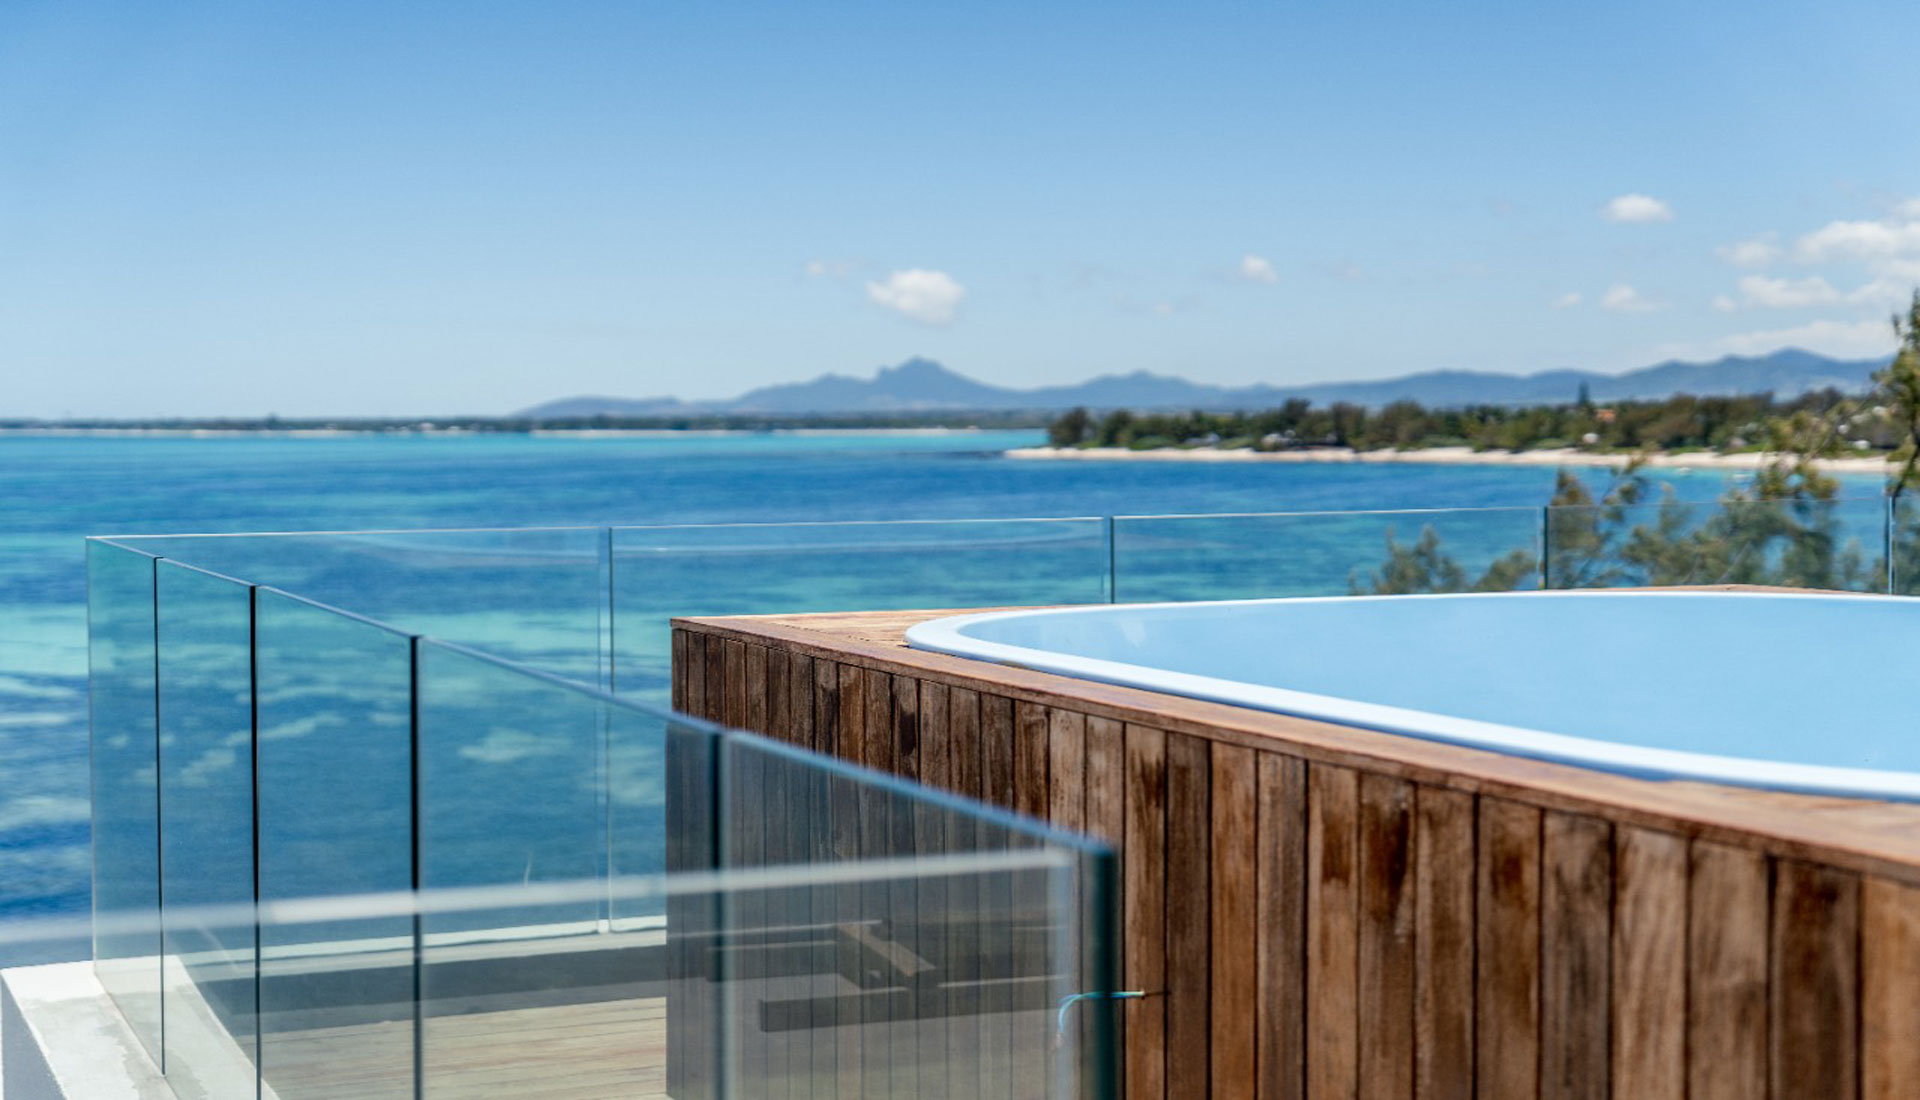 Ocean Tarraces poste lafayette apartment water front westimmo real estate mauritius